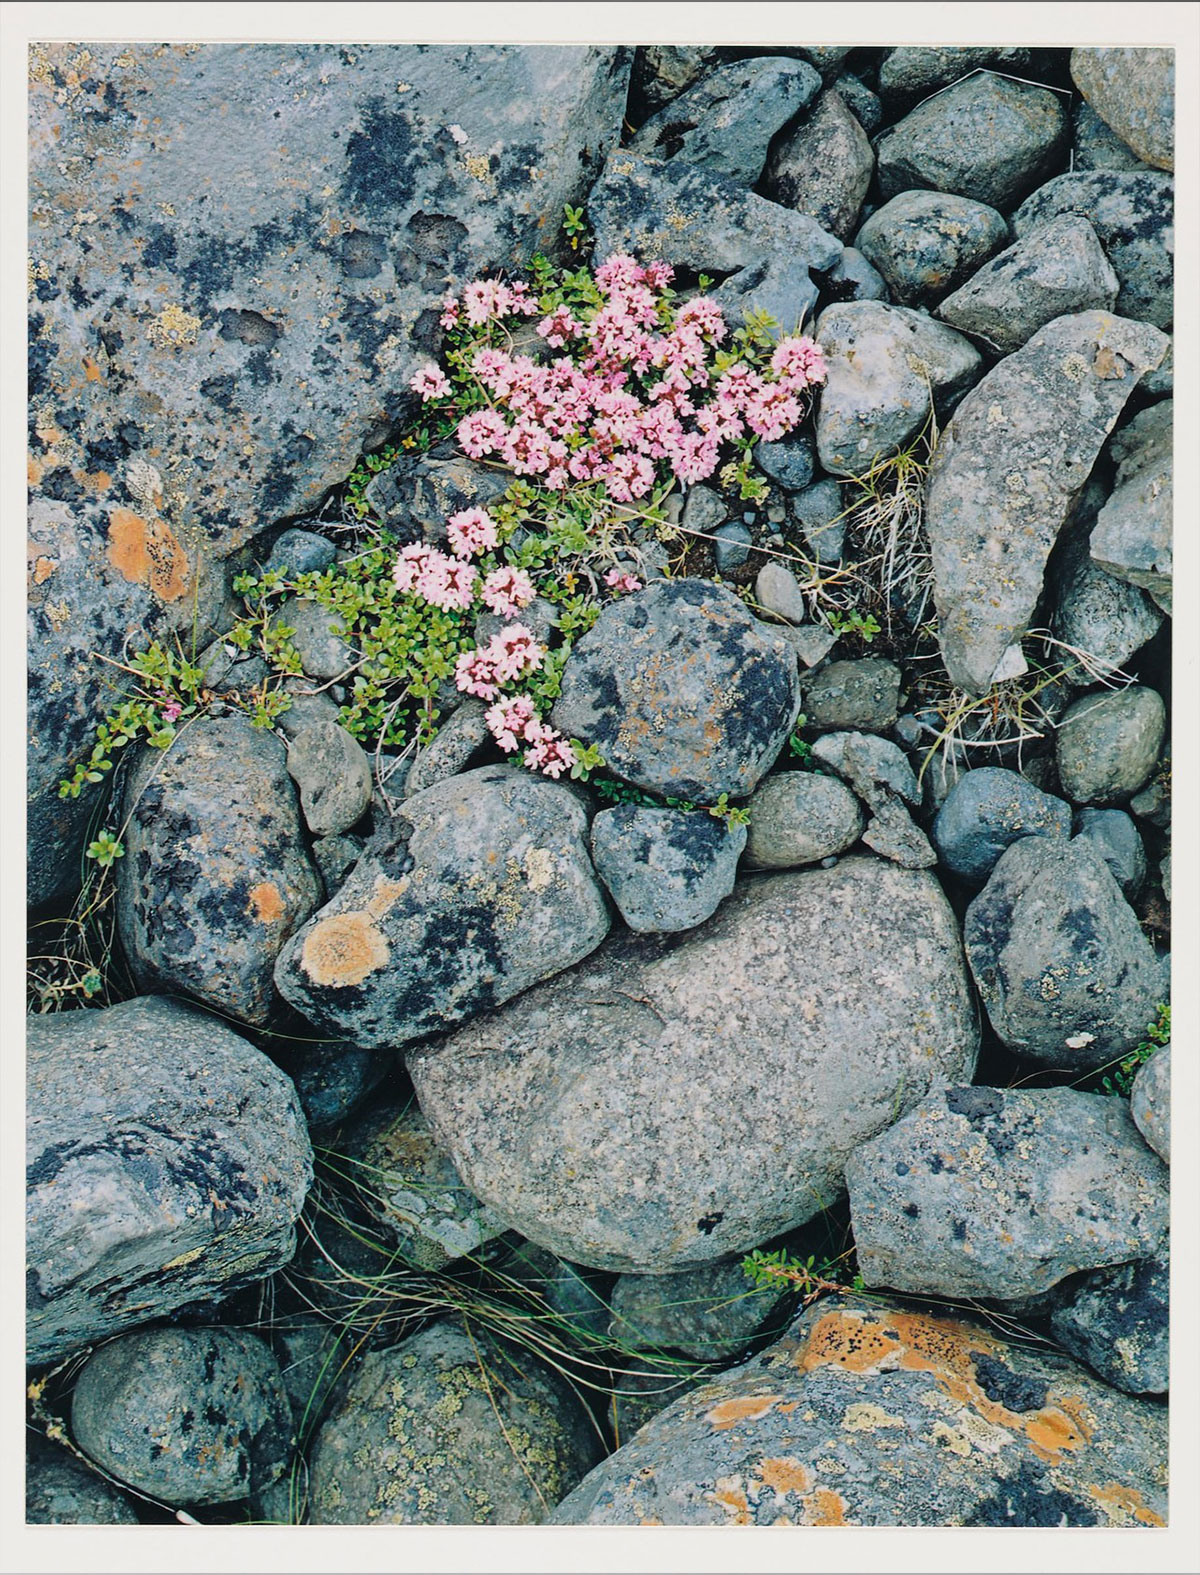 Delicate, pale pink flowers with bright green leaves grow through a bed of bluish-gray stones